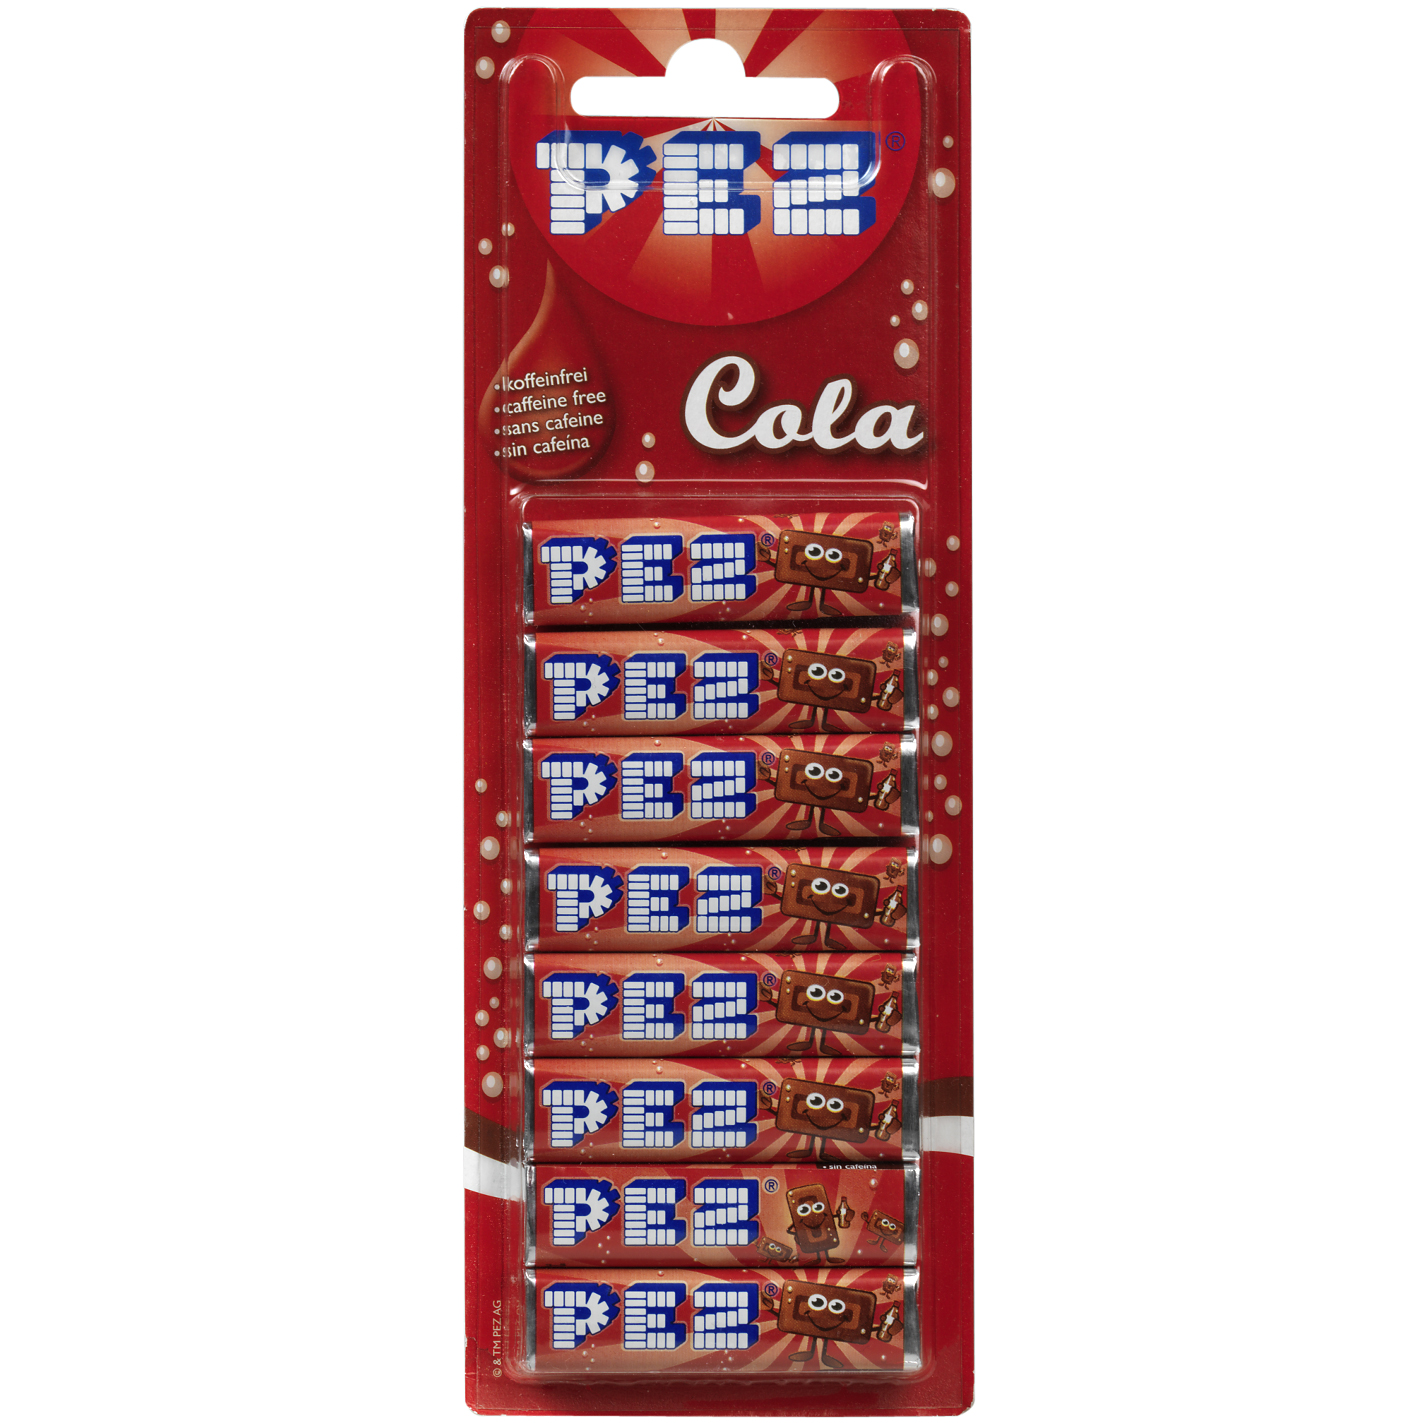 PEZ - Refill Cola, 8-pack